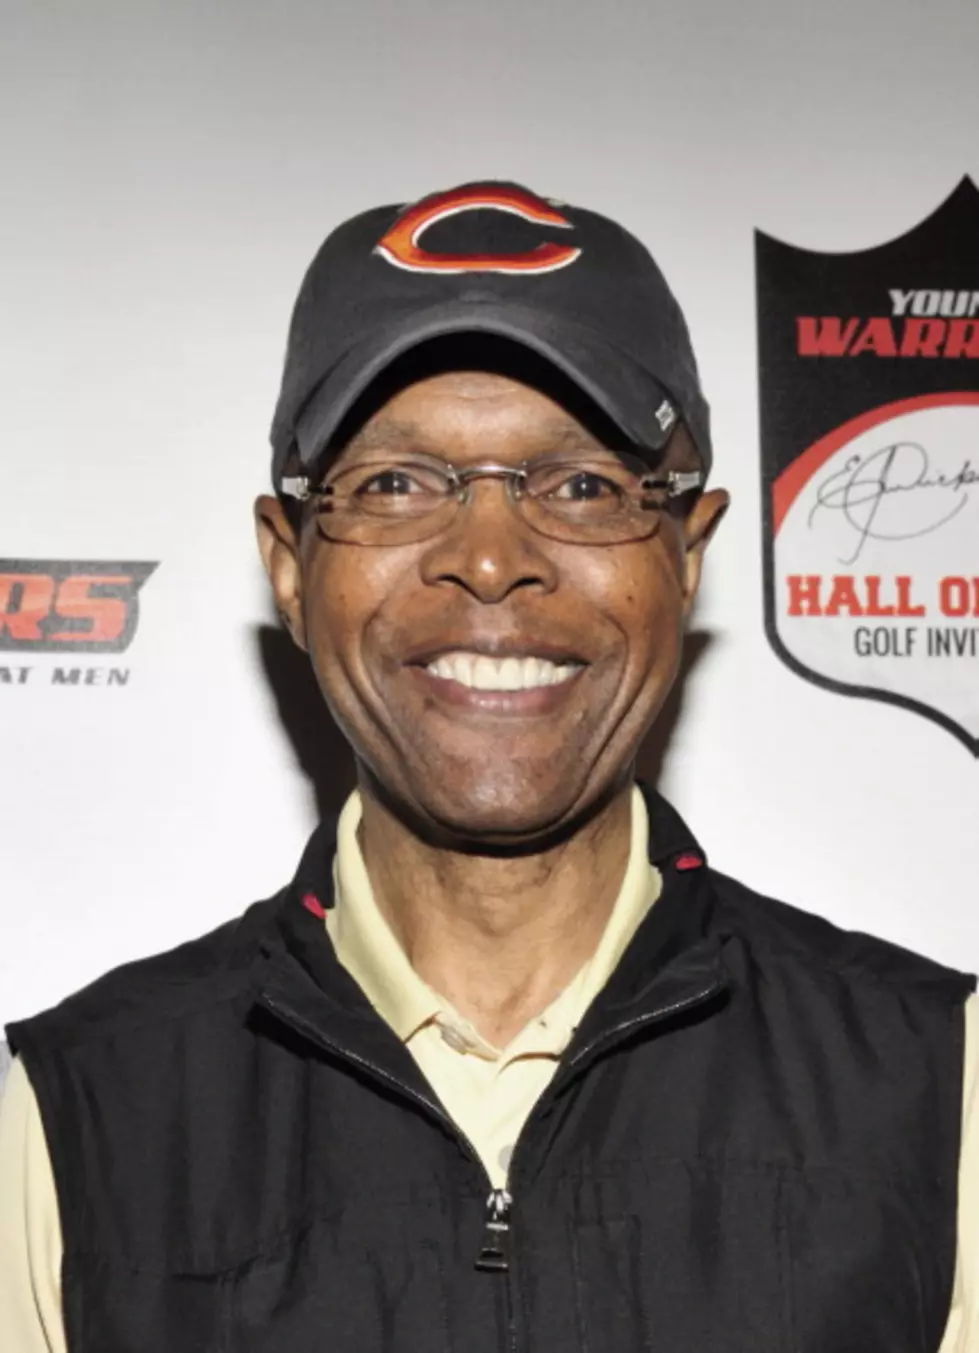 Here Are Some Things About Gale Sayers You Might Not Know